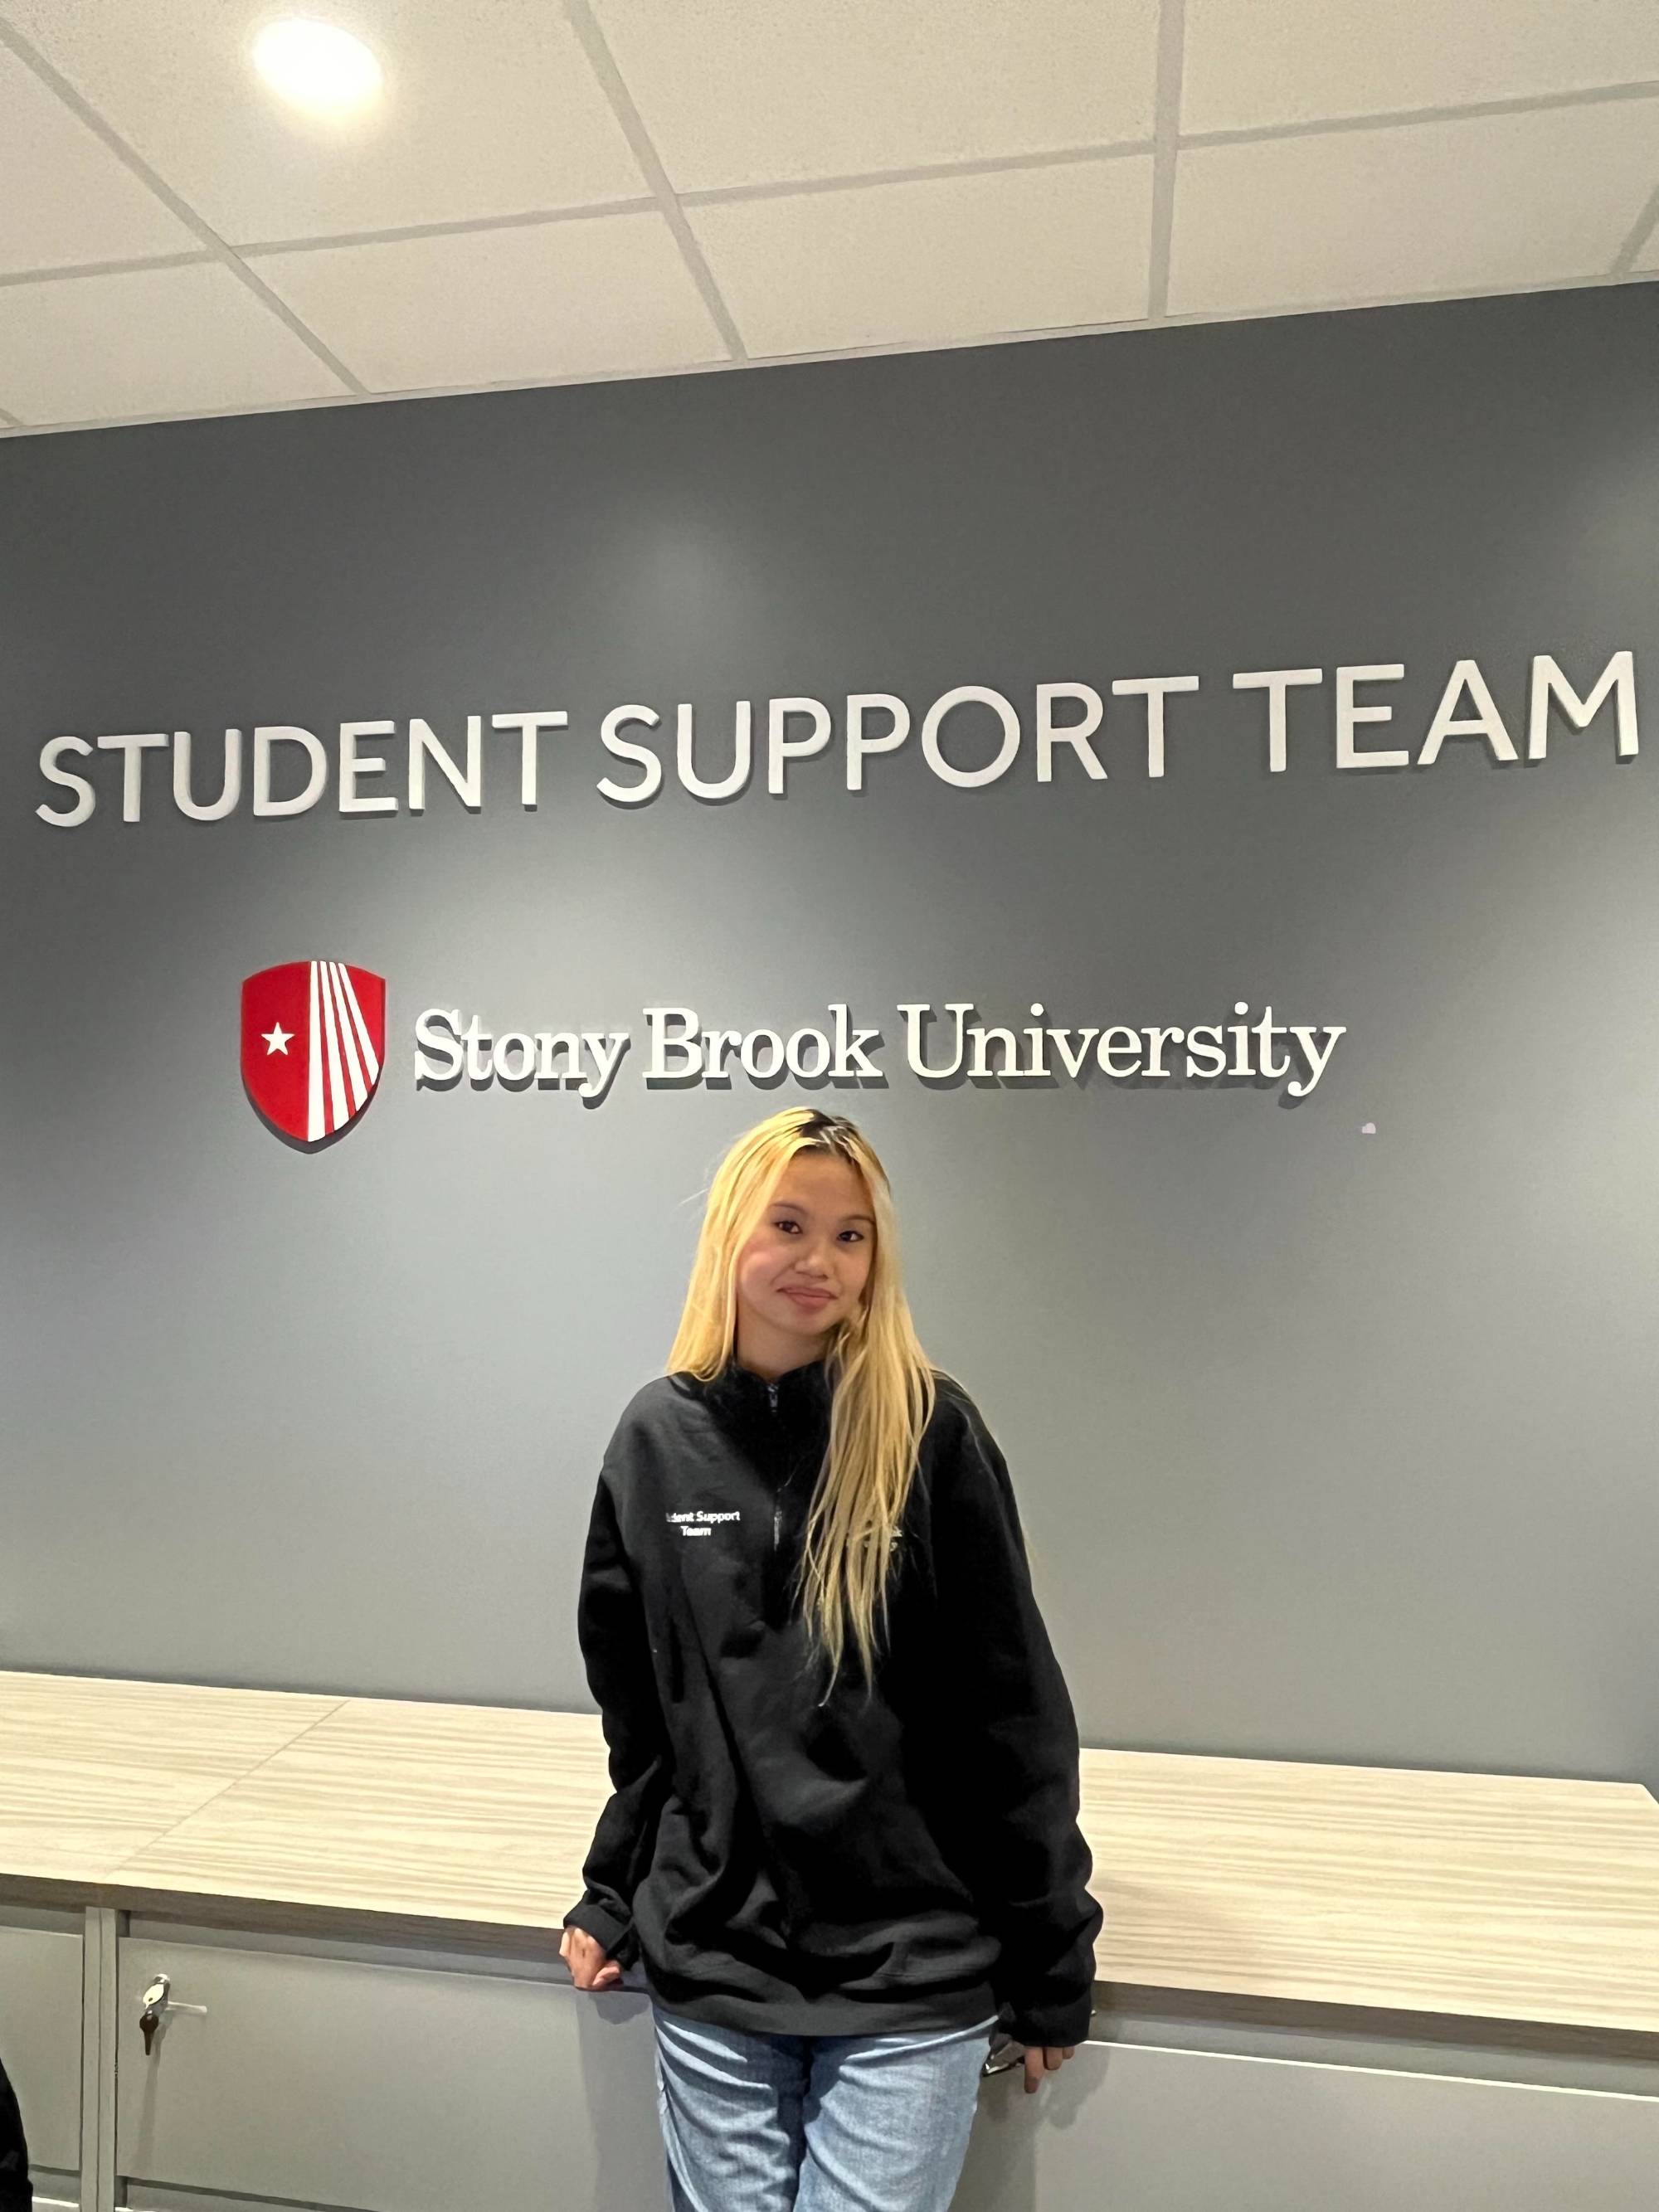 Female student in front of student support team wall